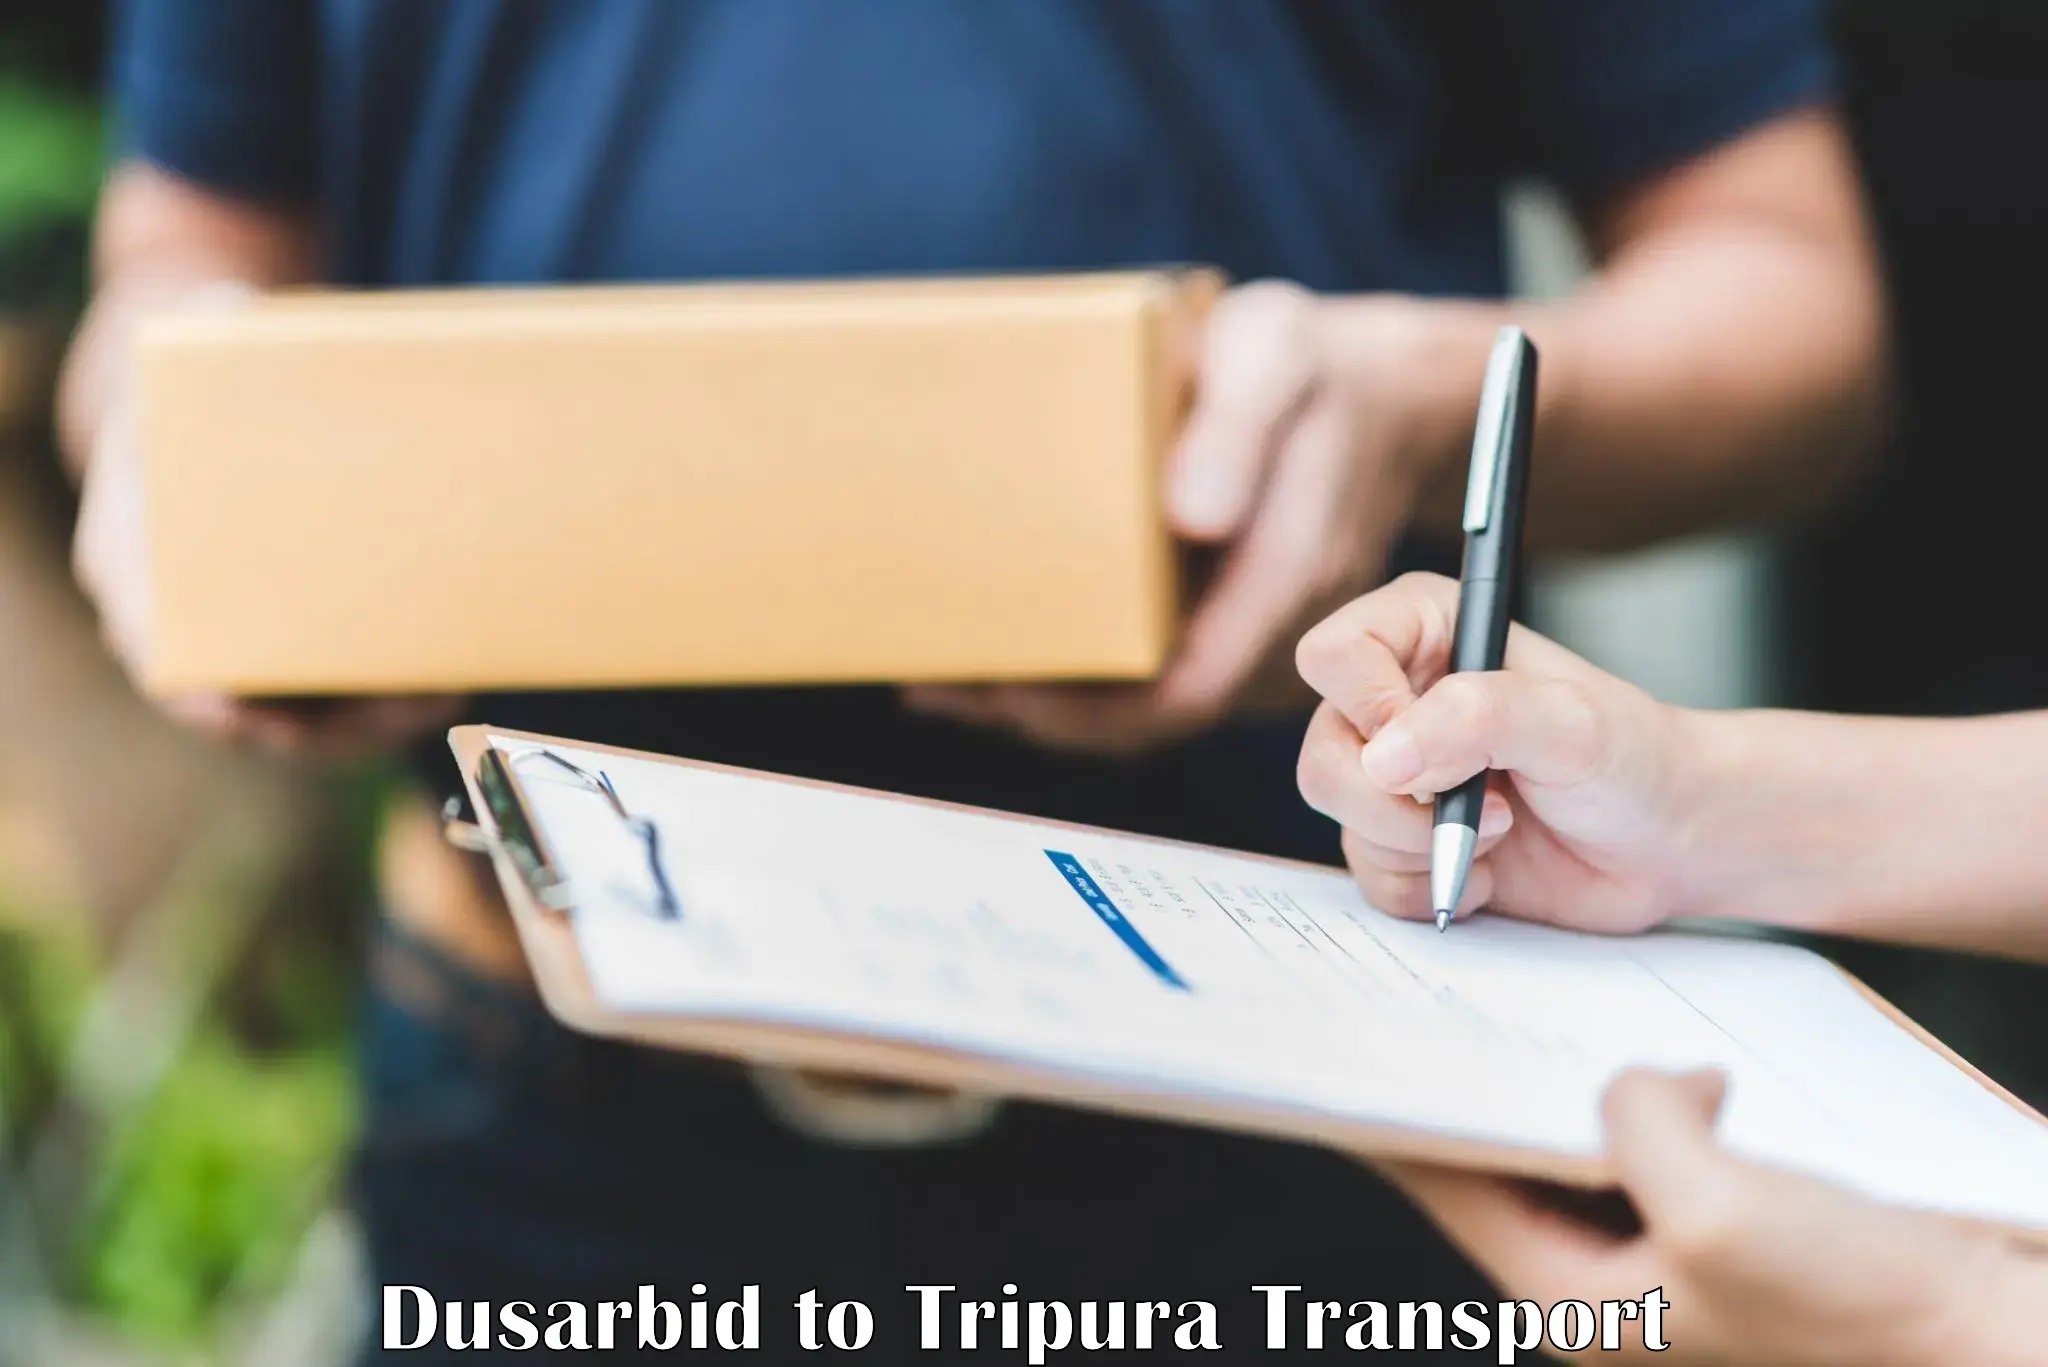 Transport bike from one state to another Dusarbid to Tripura